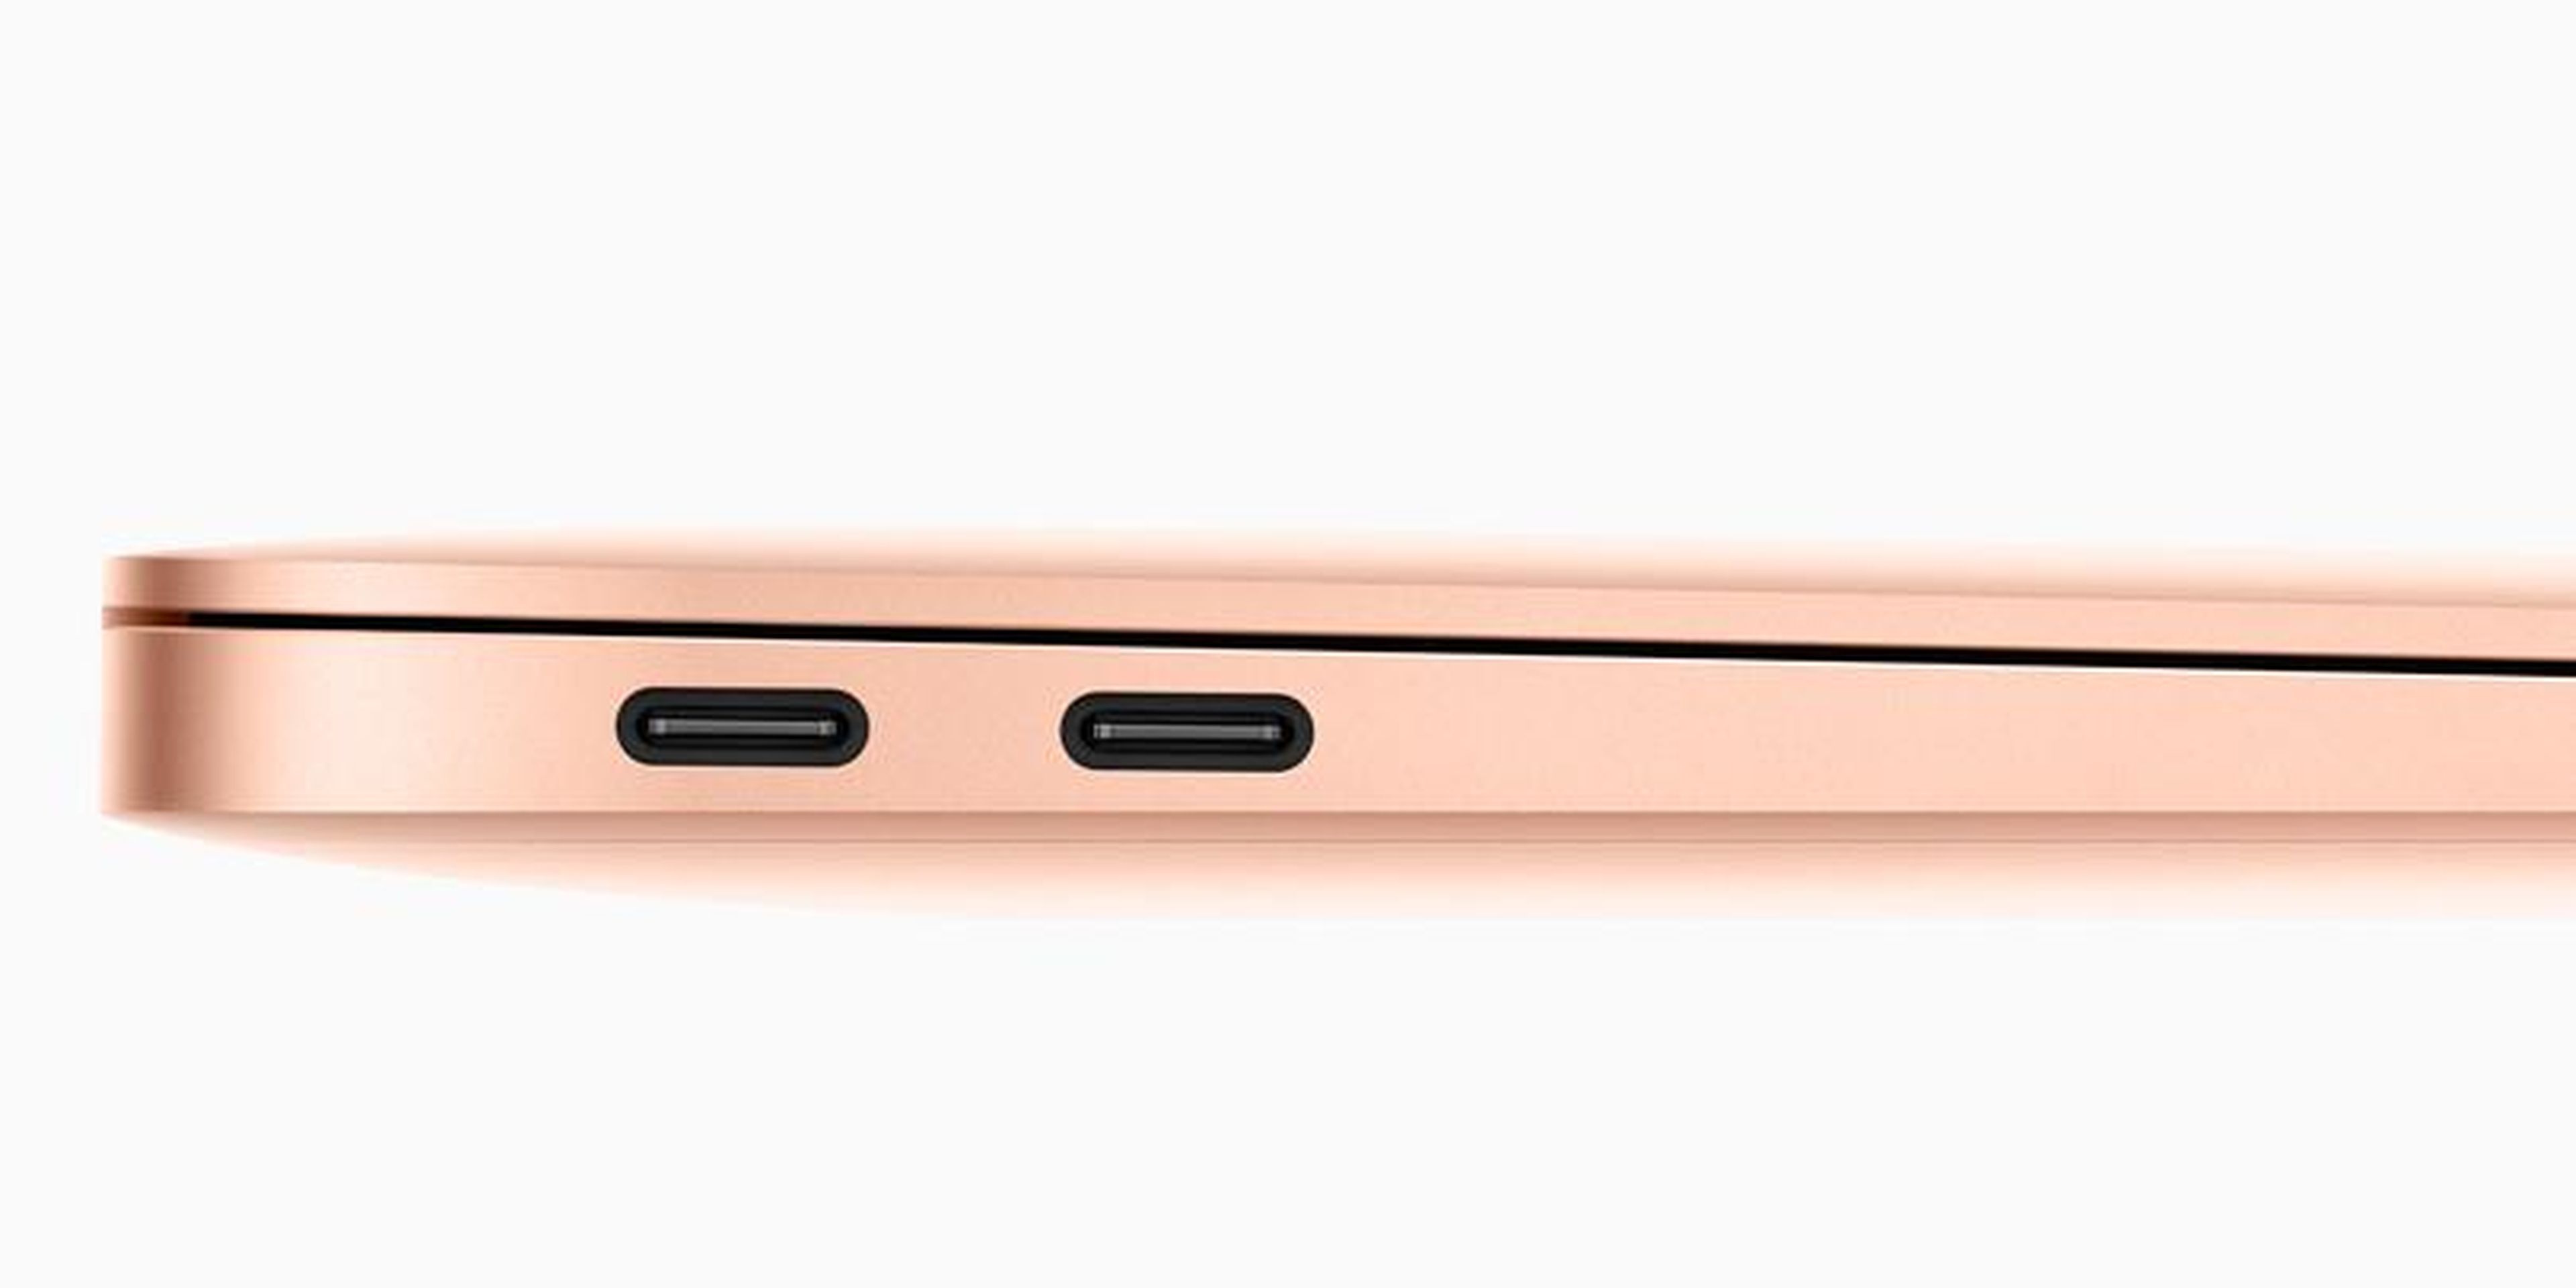 The MacBook Air and MacBook Pro have the same number of USB-C ports.